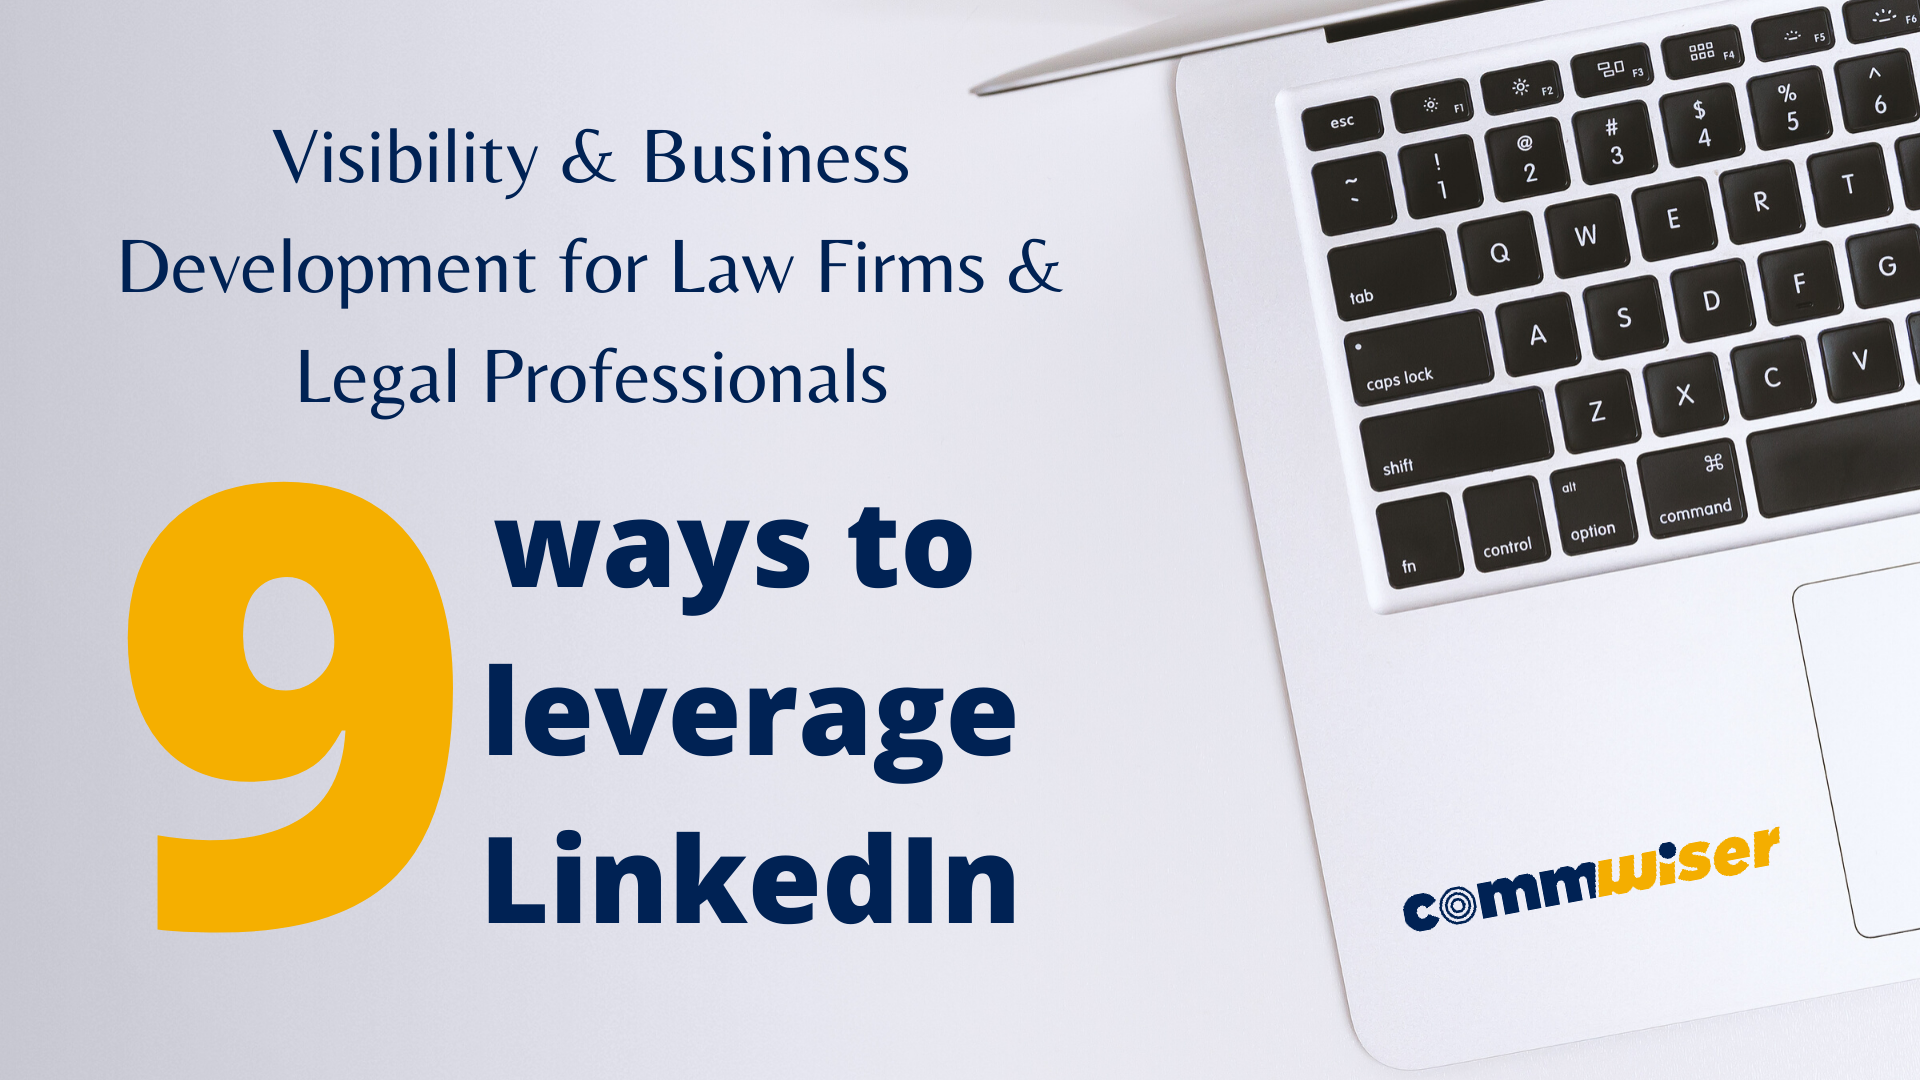 Visibility & Business Development for Law Firms & Legal Professionals